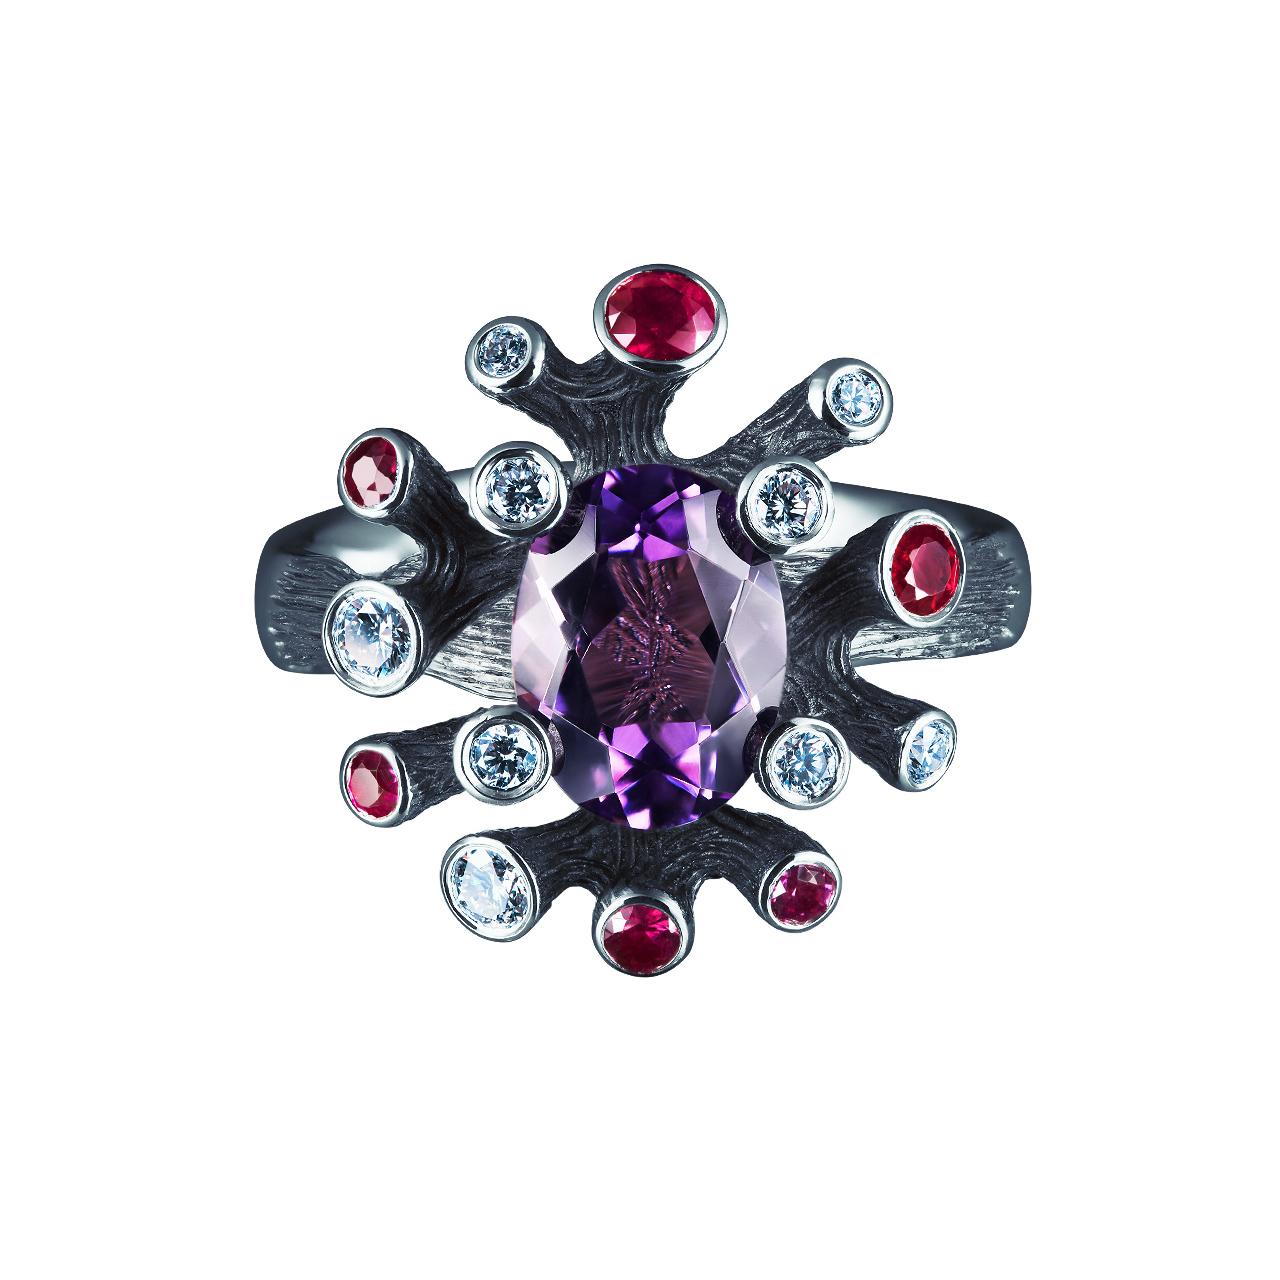 - 10 Round Diamonds - 0.20 ct, G/ VVS
- 6 Rubies - 0.23 ct
- 1 Amethyst - 1.15 ct
- 18K White Gold 
- Weight: 7.59 g
- Size: 17 mm
This elegant ring from the Coral collection of Jewelry Theater features a beautiful 1.15 ct amethyst, surrounded with